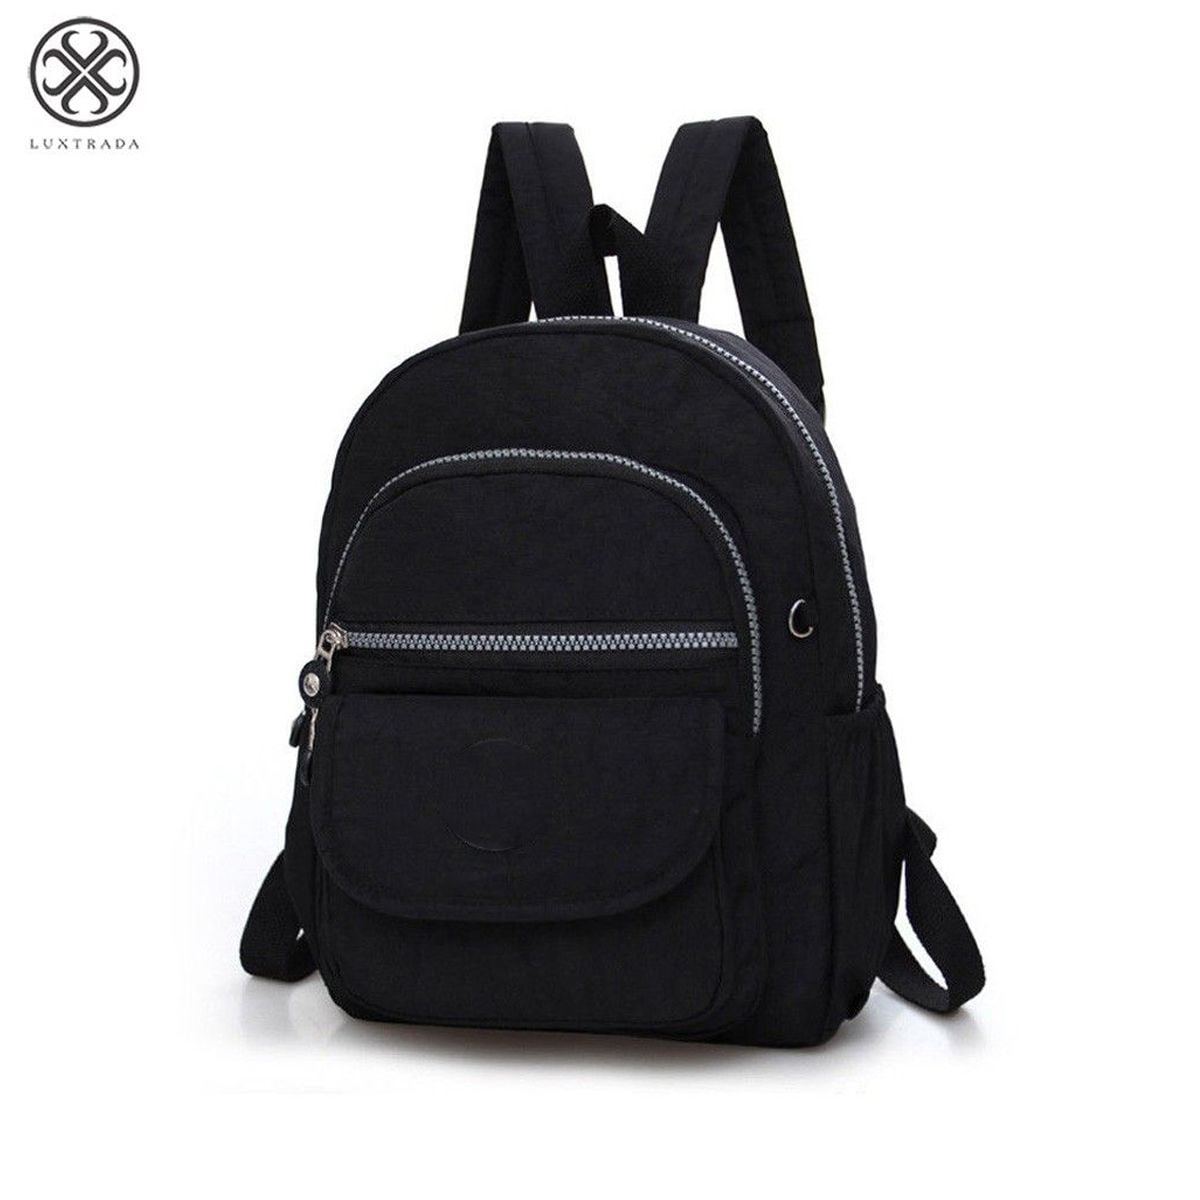 Madison & Dakota 13.5”L Mini Canvas Backpack for Everyday, School,  Recreation, Commuting and Travel in Black